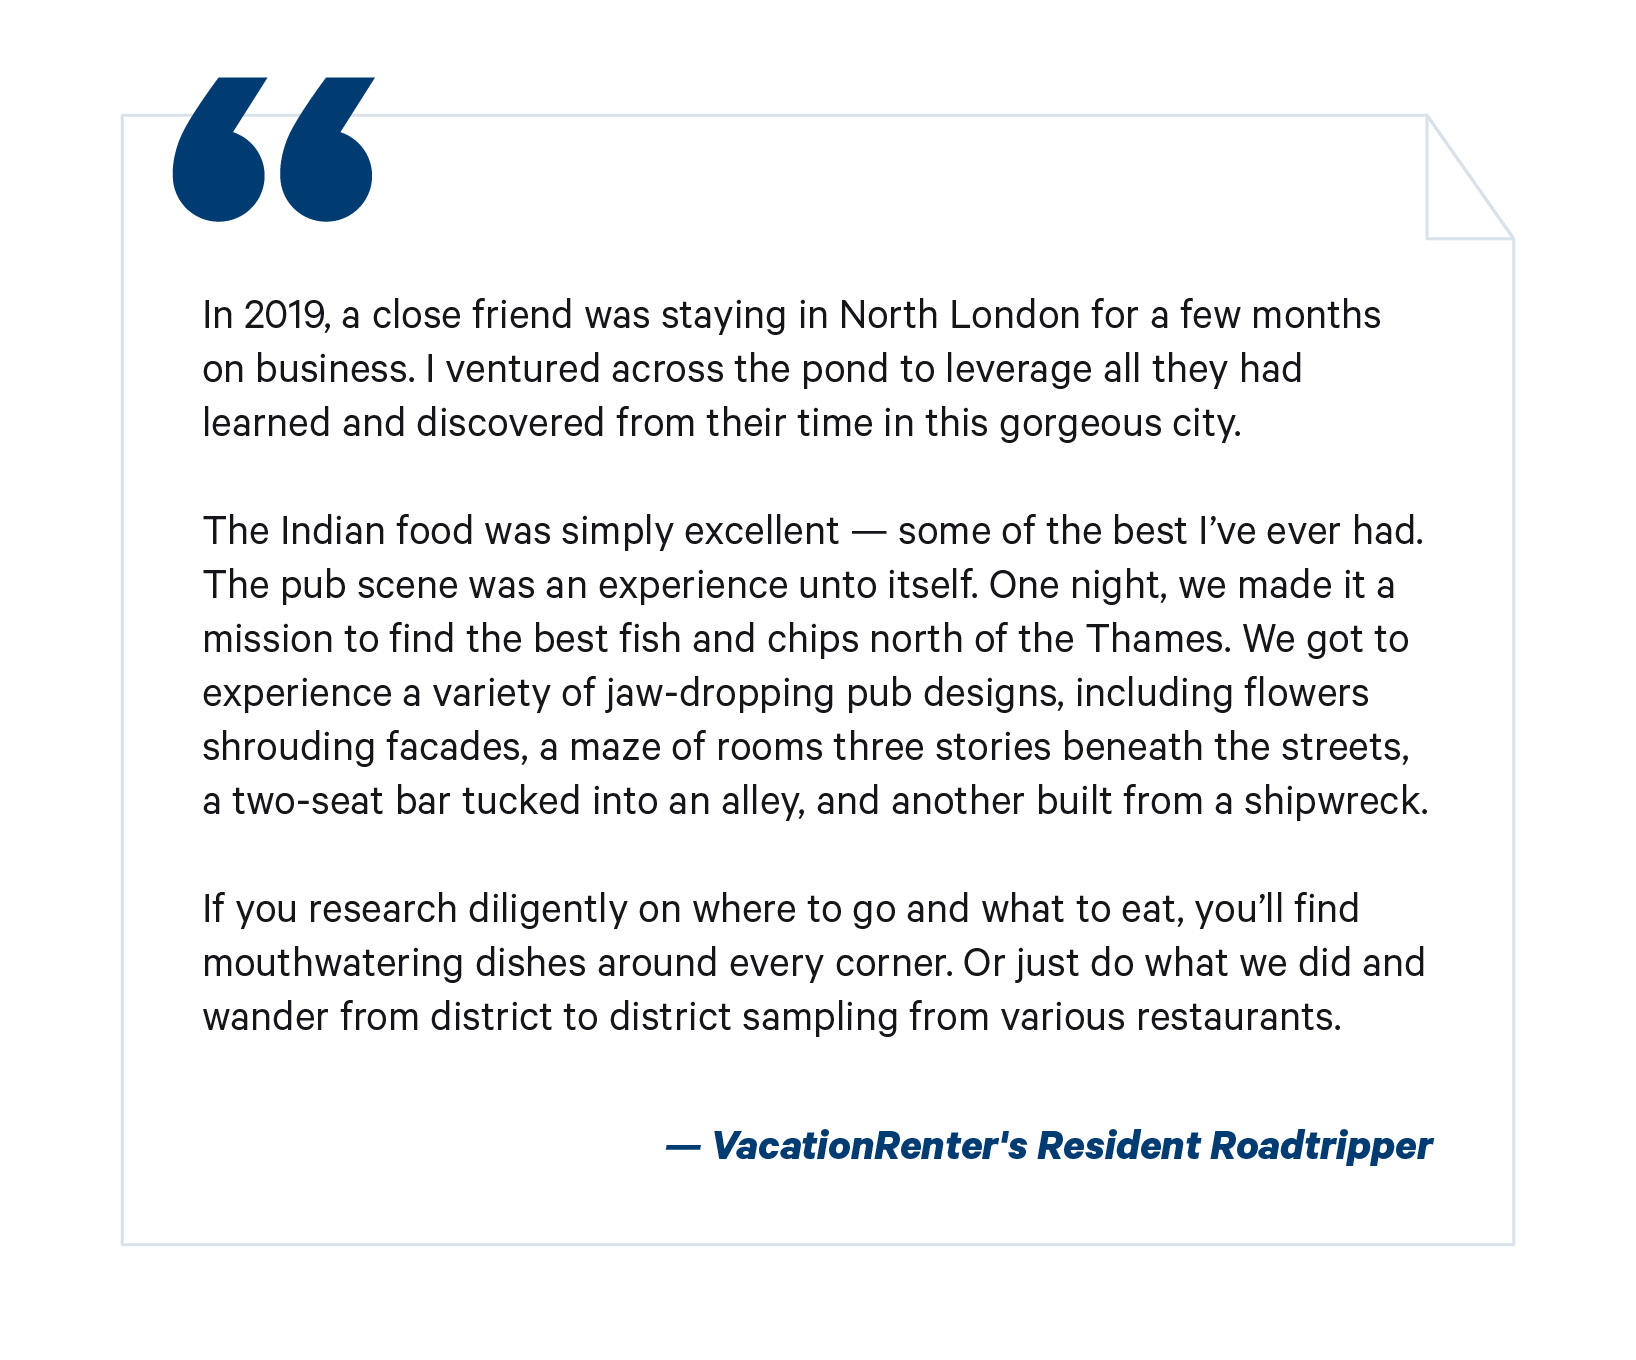 Quote from VacationRenter's resident roadtripper on London